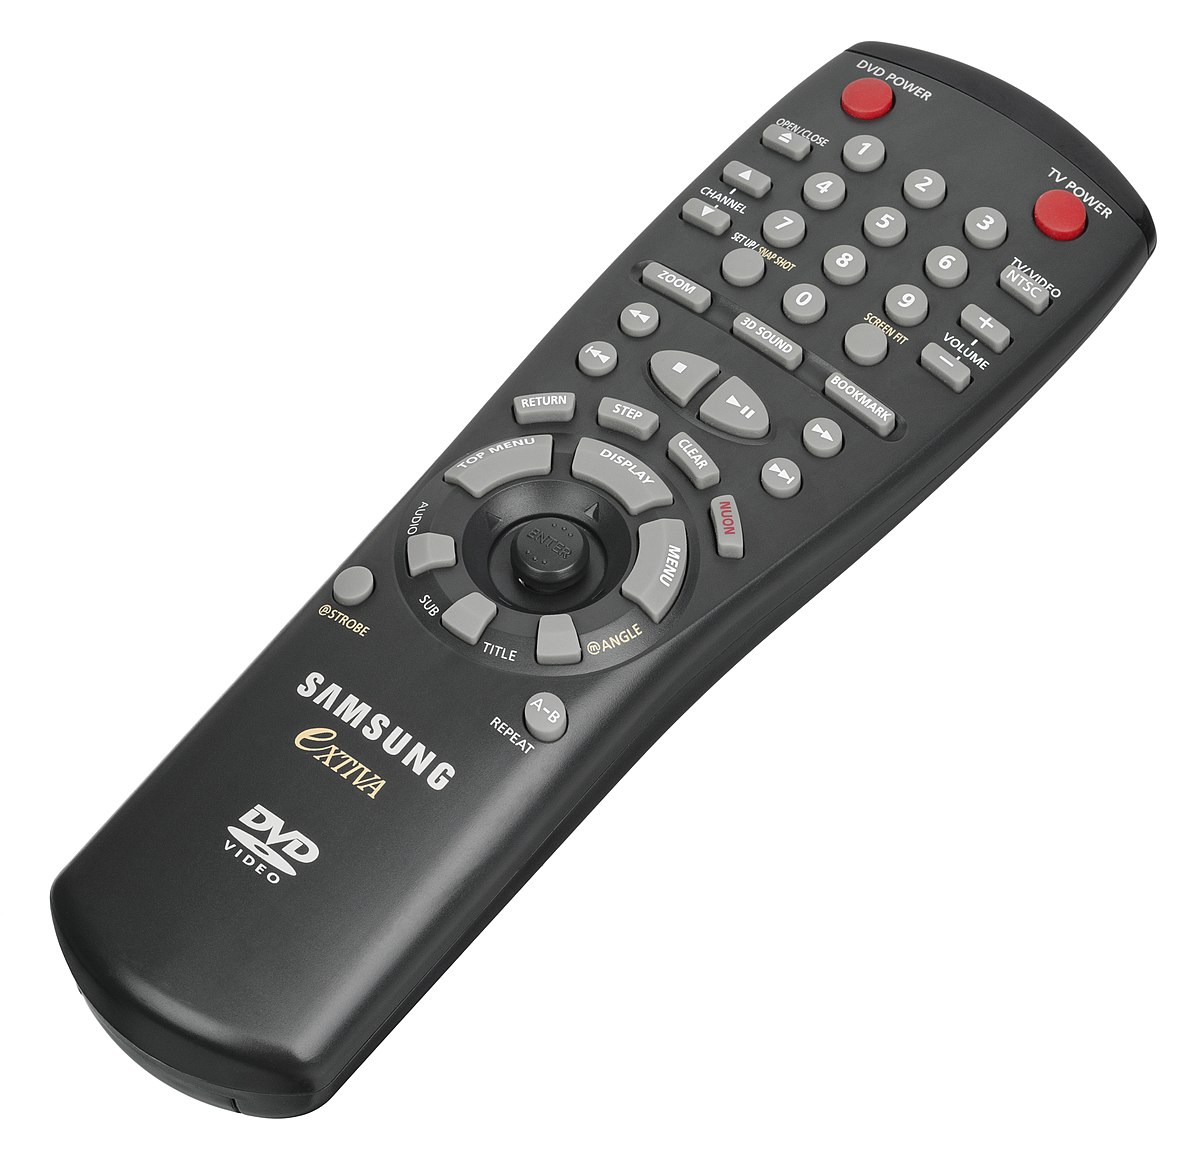 AIMS Power Remote On/Off Switch